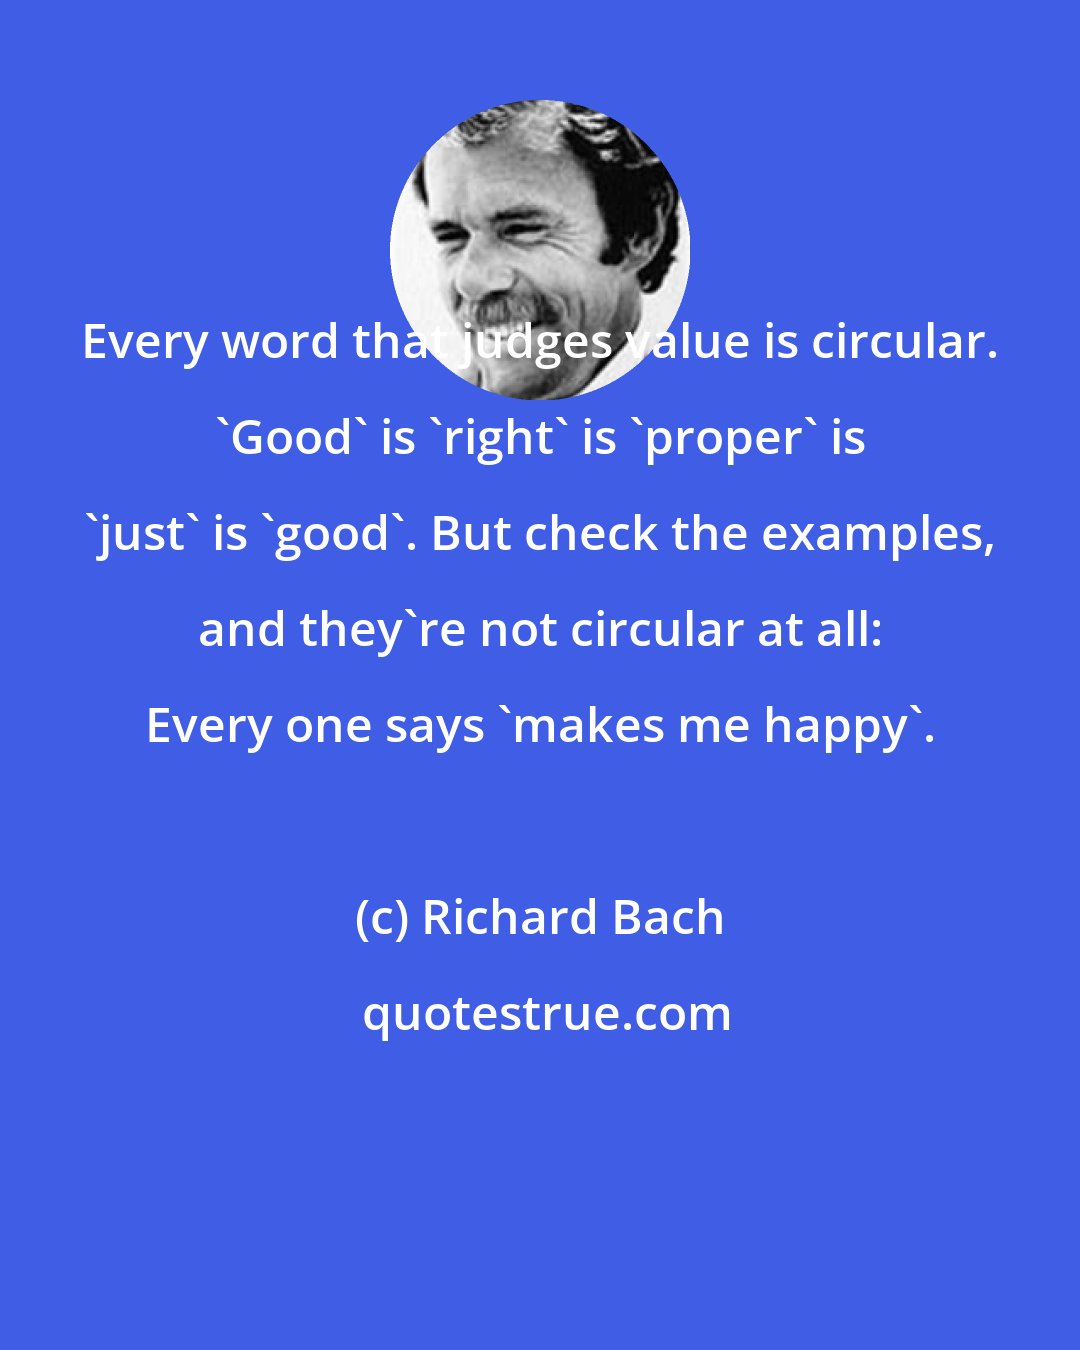 Richard Bach: Every word that judges value is circular. 'Good' is 'right' is 'proper' is 'just' is 'good'. But check the examples, and they're not circular at all: Every one says 'makes me happy'.